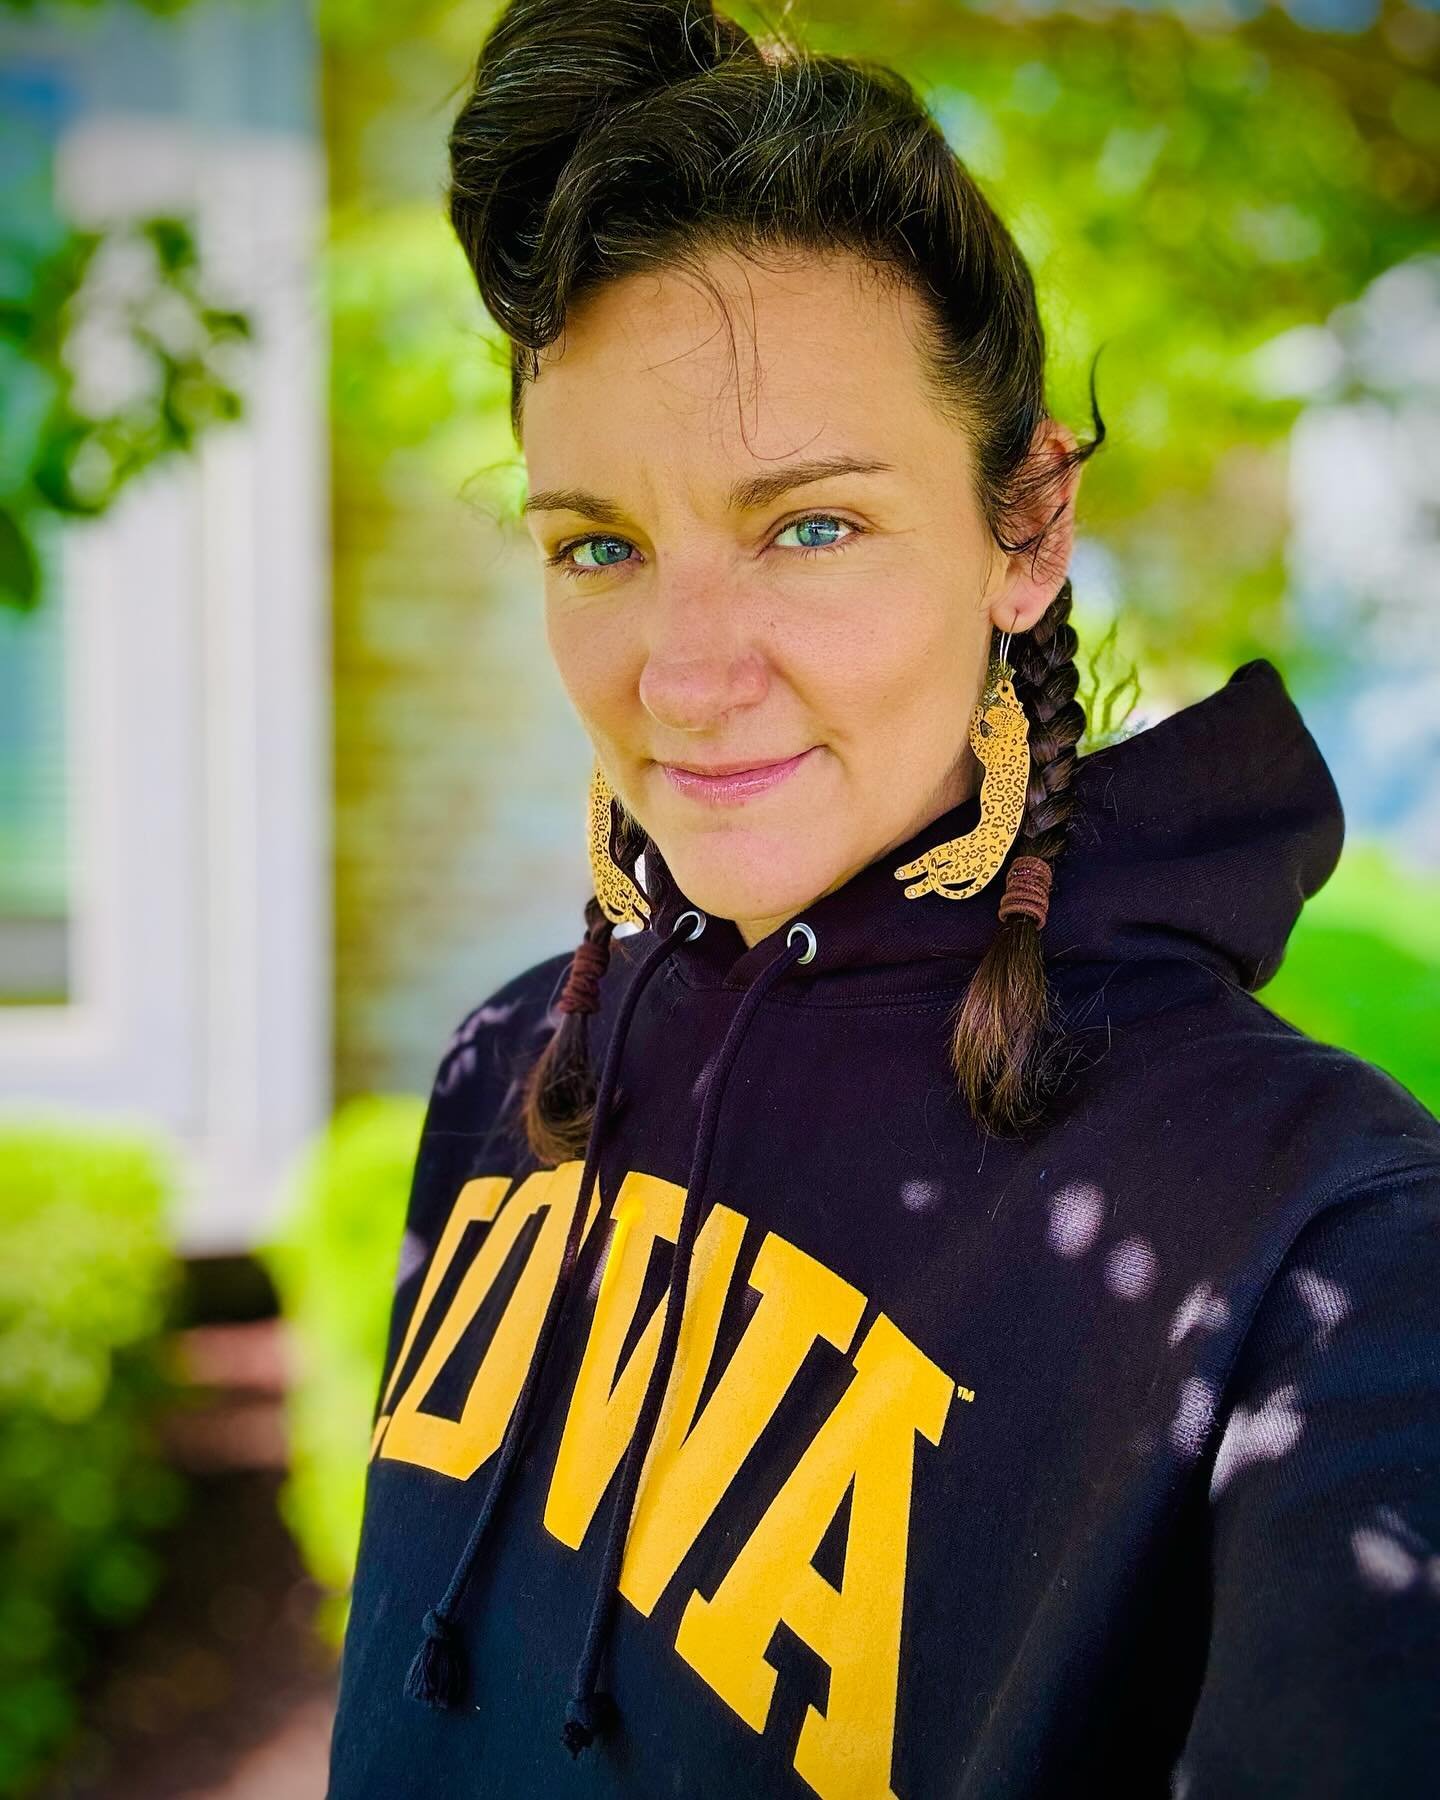 ooohie I do love a novel challenge&hellip;. 𝙮'𝙖𝙡𝙡, 𝙄 𝙜𝙤𝙩 𝙖 𝙣𝙚𝙬 𝙟𝙤𝙗! 

🐆🌻🐝🚸💛🎵

Say hey to the 2024-2025 Grant Wood Fellow at the University of Iowa School of Music. I&rsquo;m thrilled and grateful! 

Next school year I get to desi